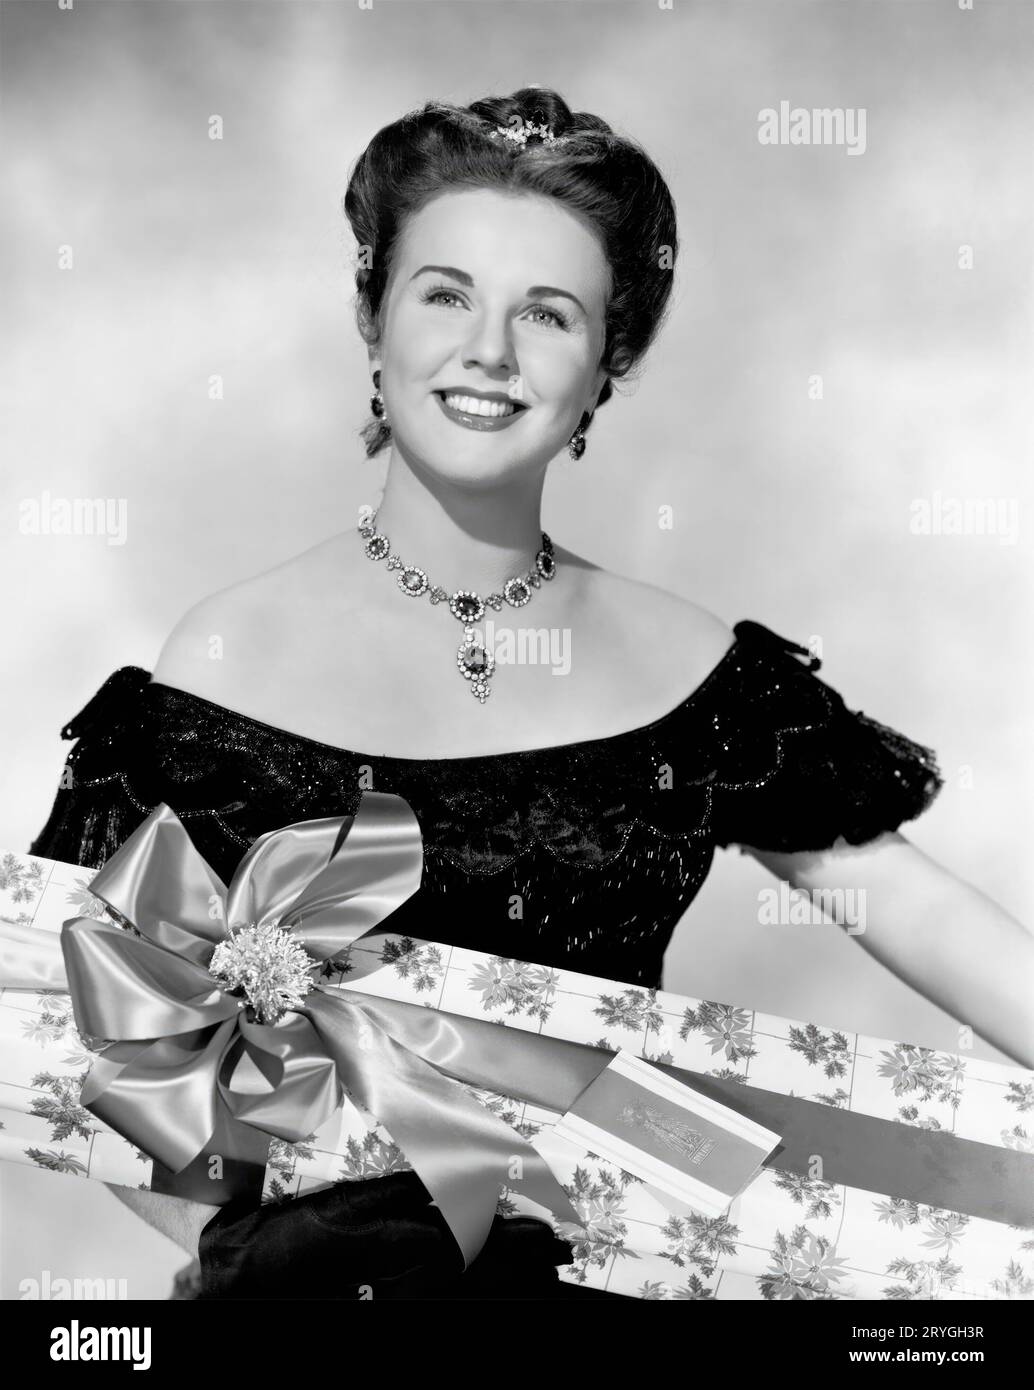 DEANNA DURBIN in UP IN CENTRAL PARK (1948), directed by WILLIAM A. SEITER. Credit: UNIVERSAL PICTURES / Album Stock Photo